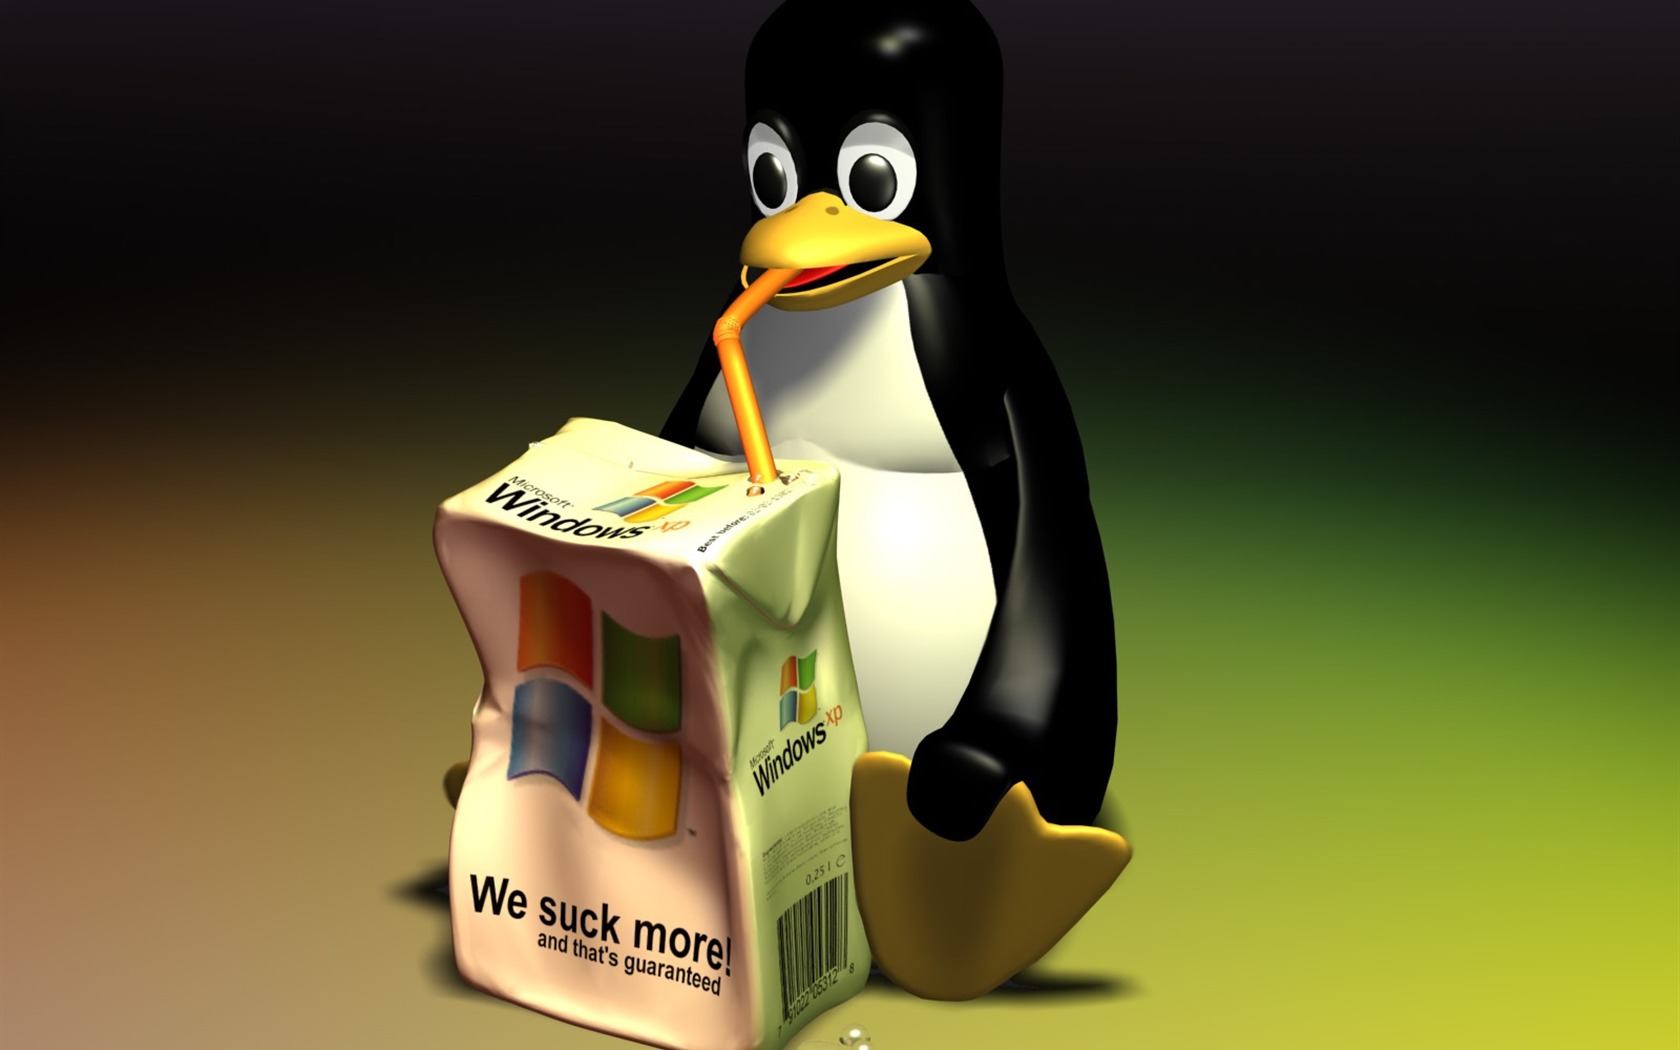 Linux tapety (1) #7 - 1680x1050